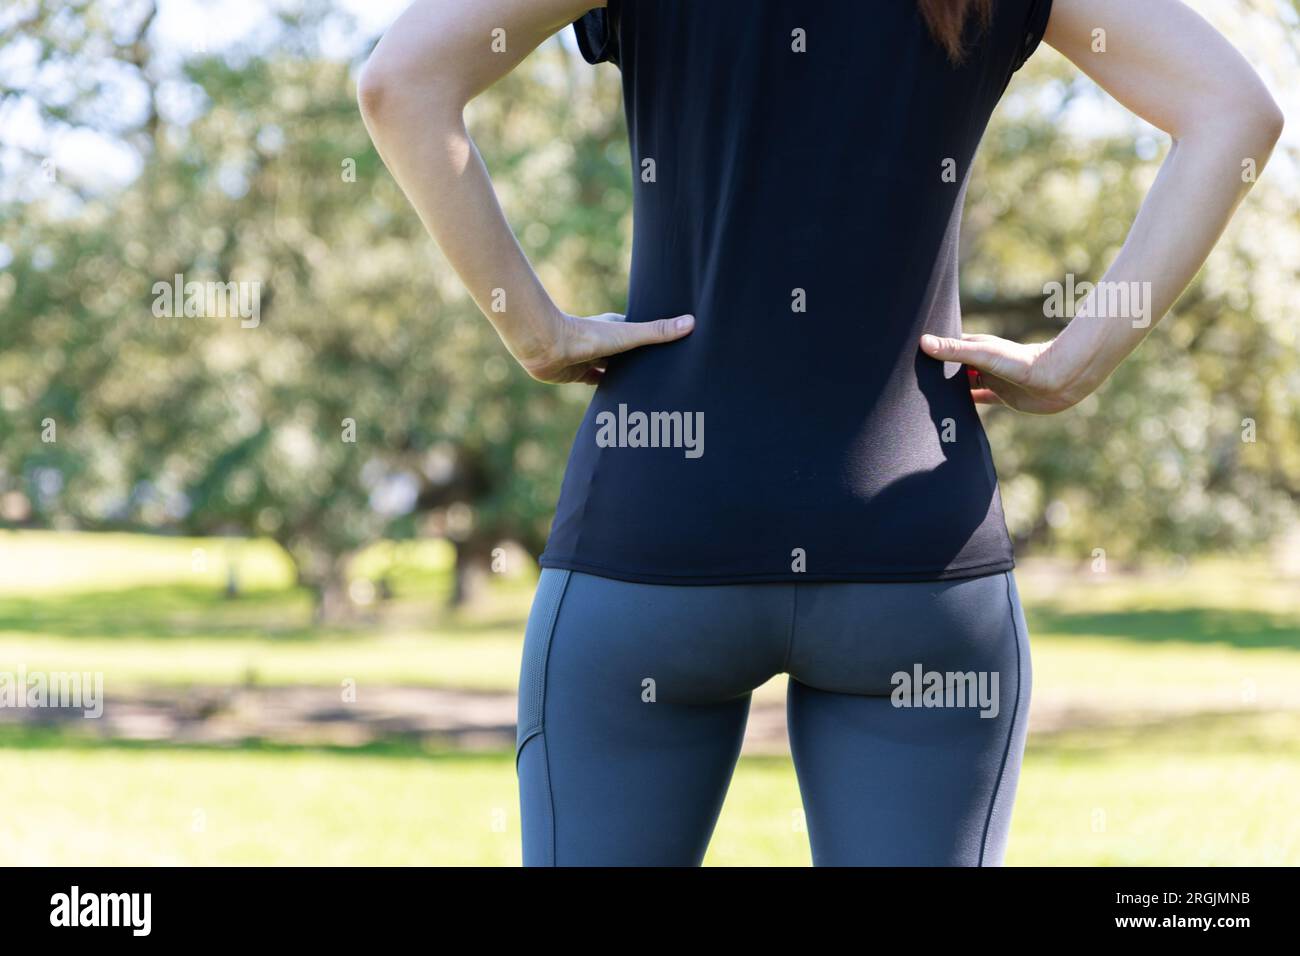 Woman with nice figure in tight leggings - back view Stock Photo - Alamy